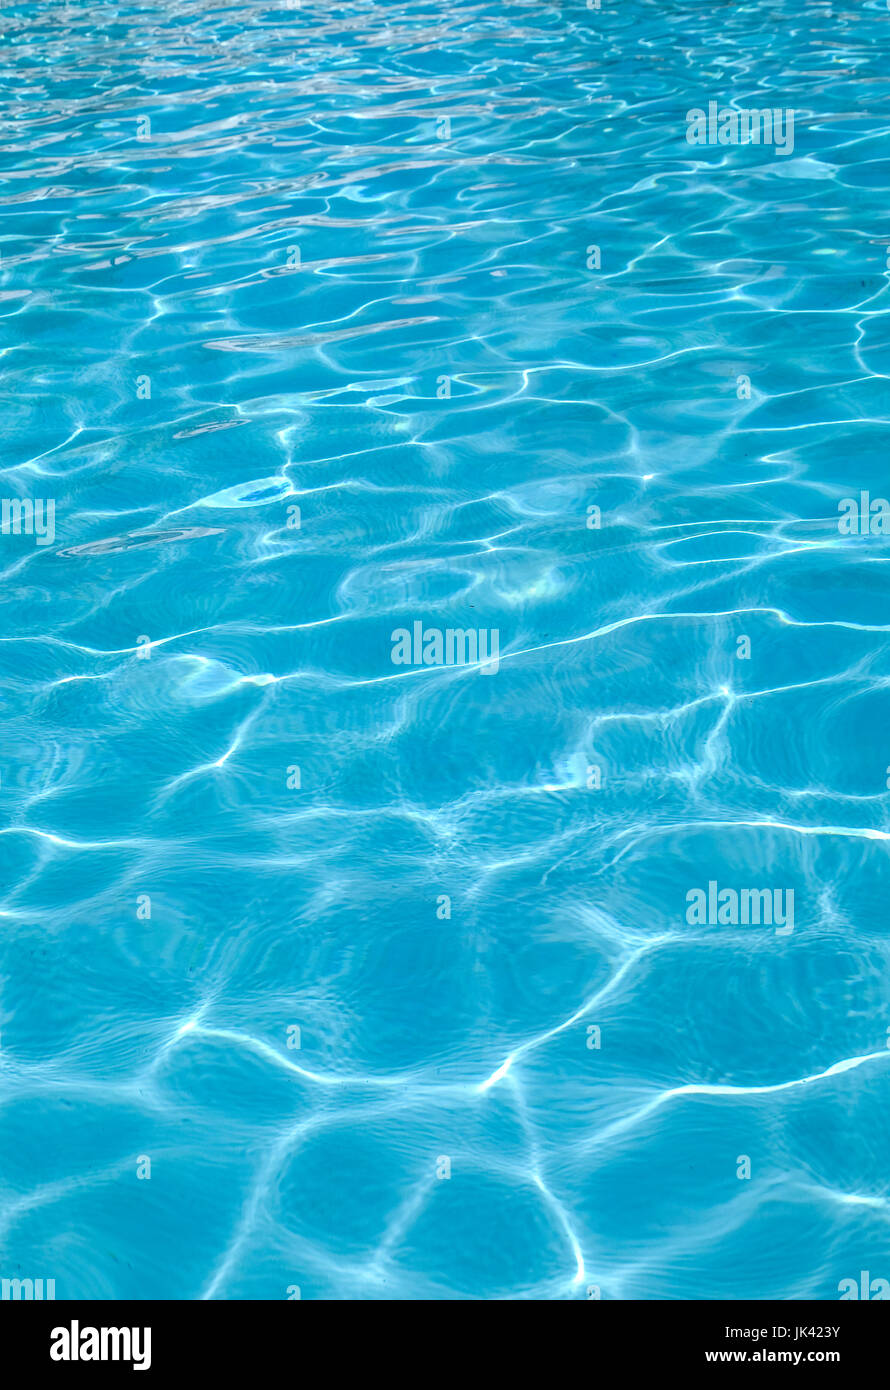 Shimmering blue water Stock Photo